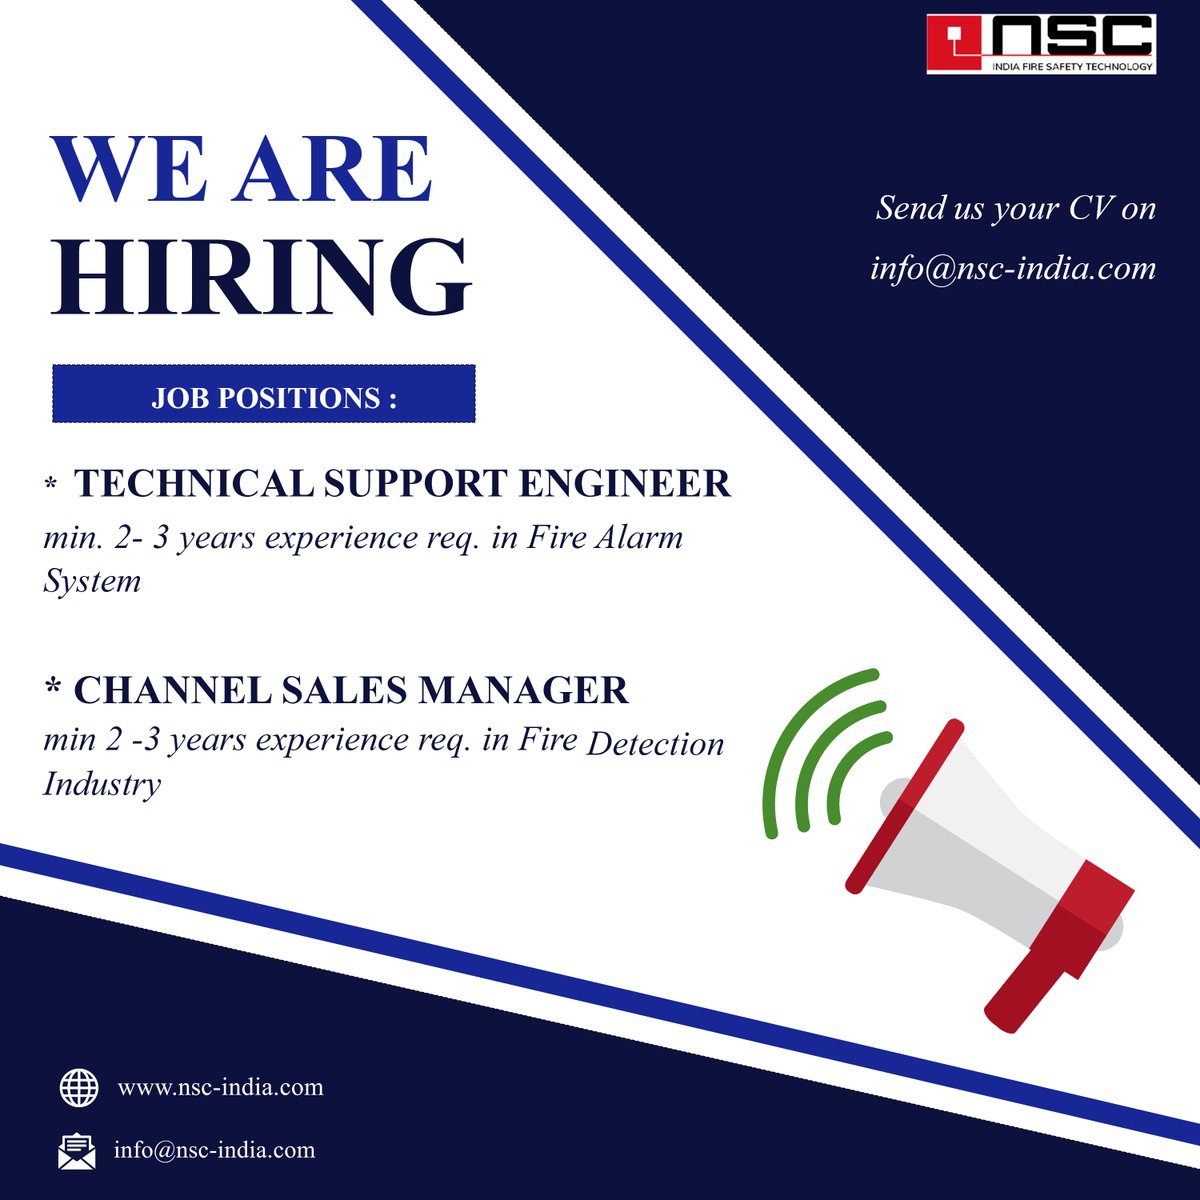 📢 We're Hiring !

Technical Support Engineer & Channel Sales Manager | Fire & Safety

You can join our team, just send us your CV on info@nsc-india.com

.
#hiring #india #team #cv #engineer #safety #firesafety #jobalert #jobhunt #jobchange #jobhelp #sales #managers #managerjobs